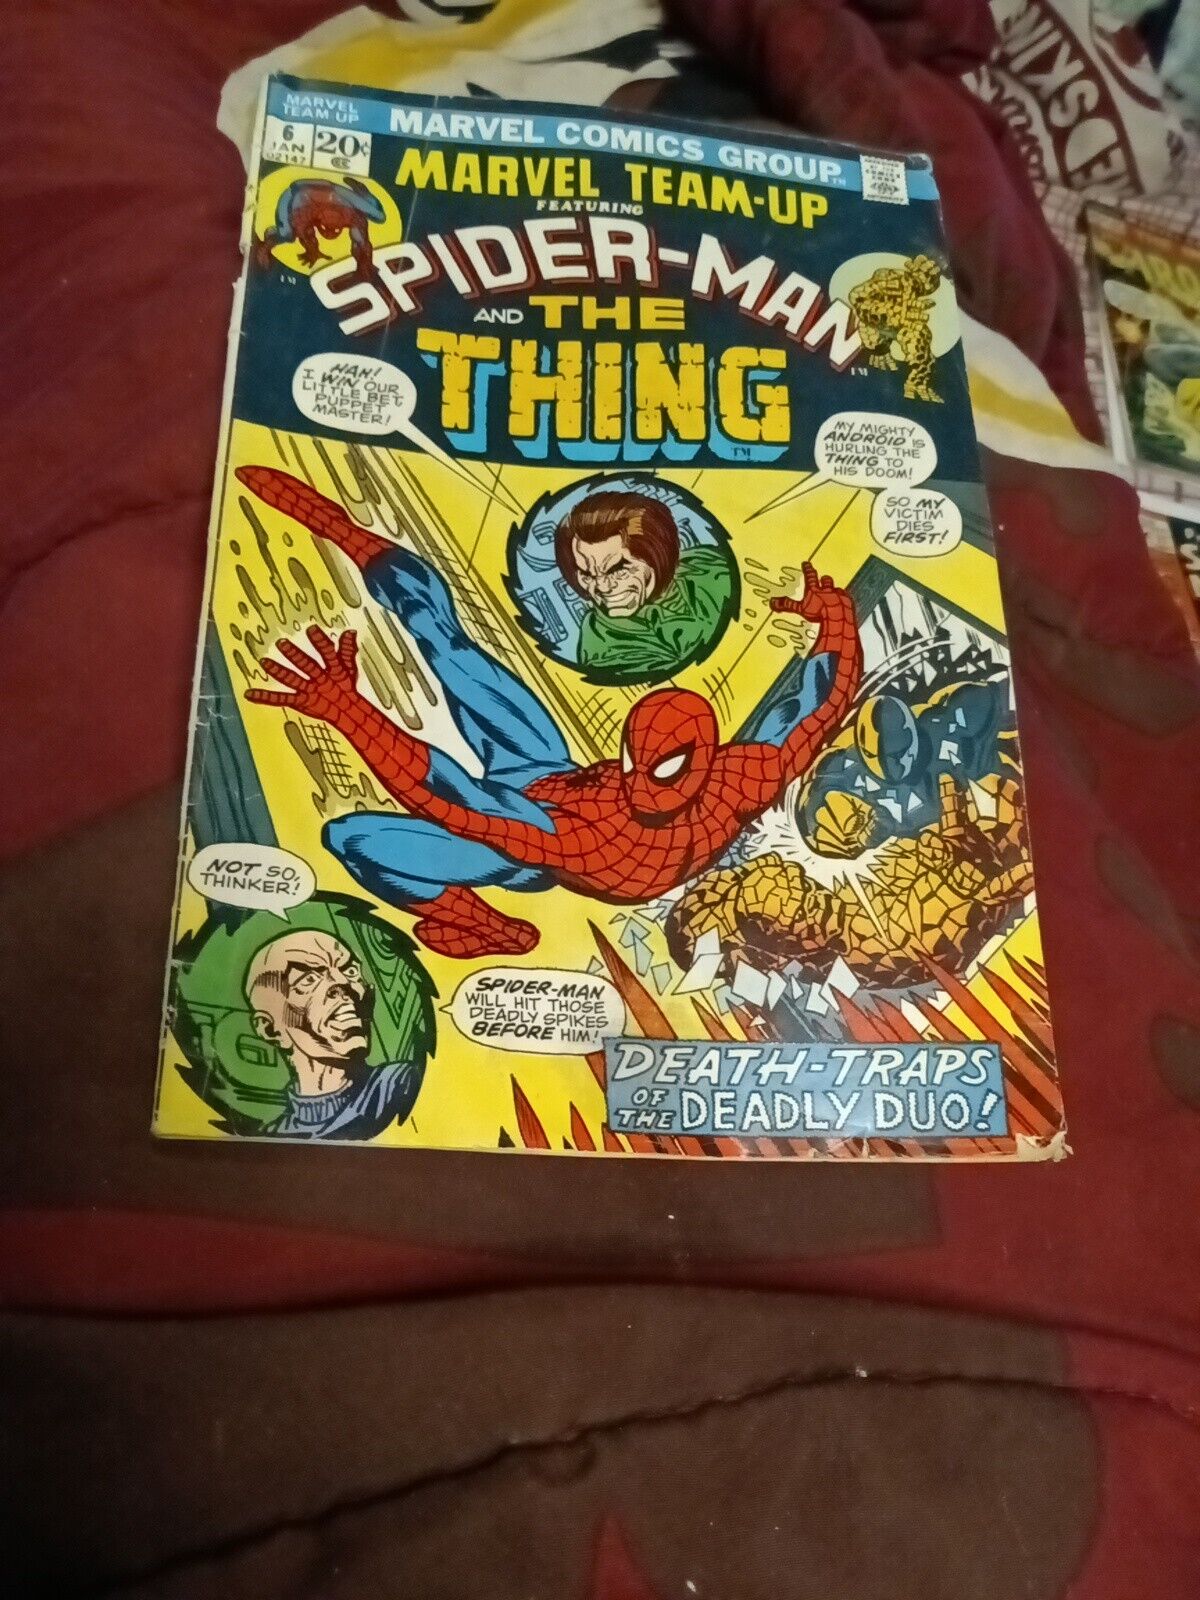 Marvel Team-Up #6 Spider-Man The THING VS PUPPET MASTER THINKER Bronze Age 1973